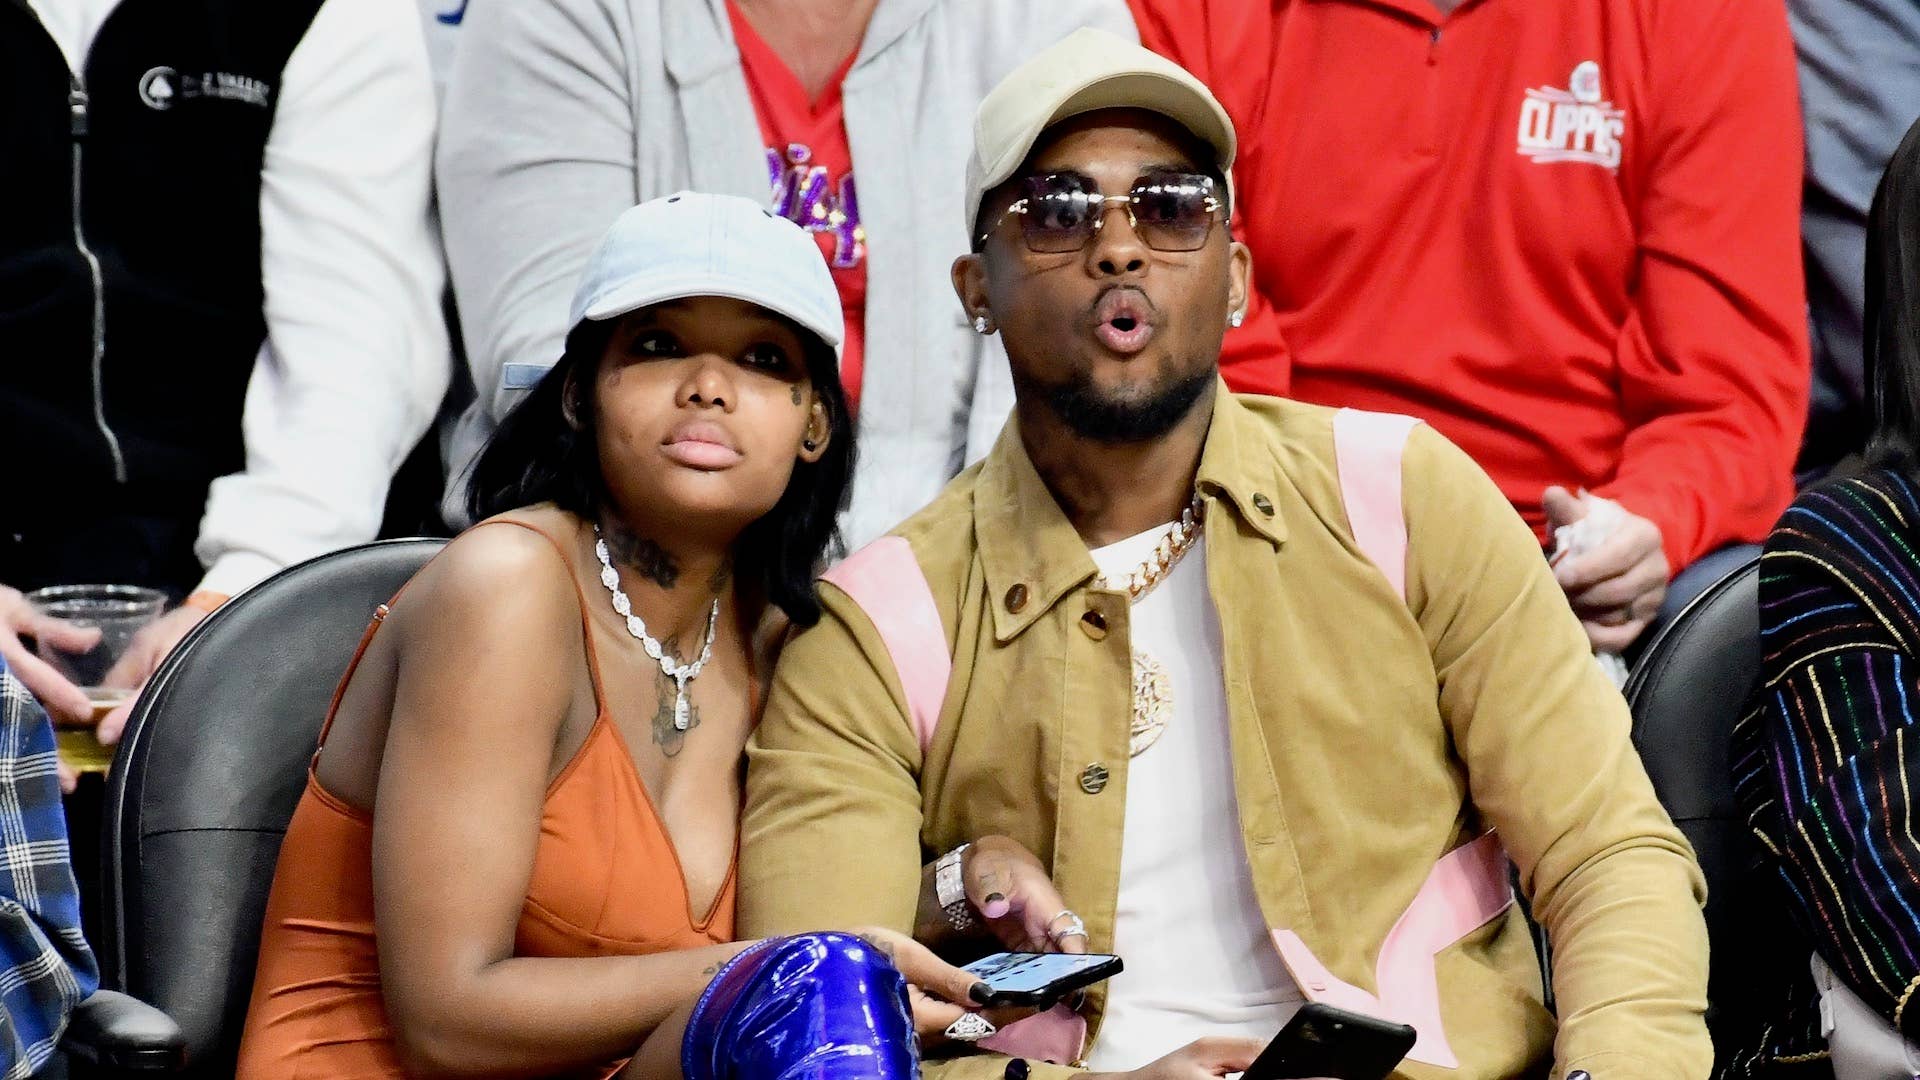 Musician Summer Walker and producer London On Da Track attend a basketball game